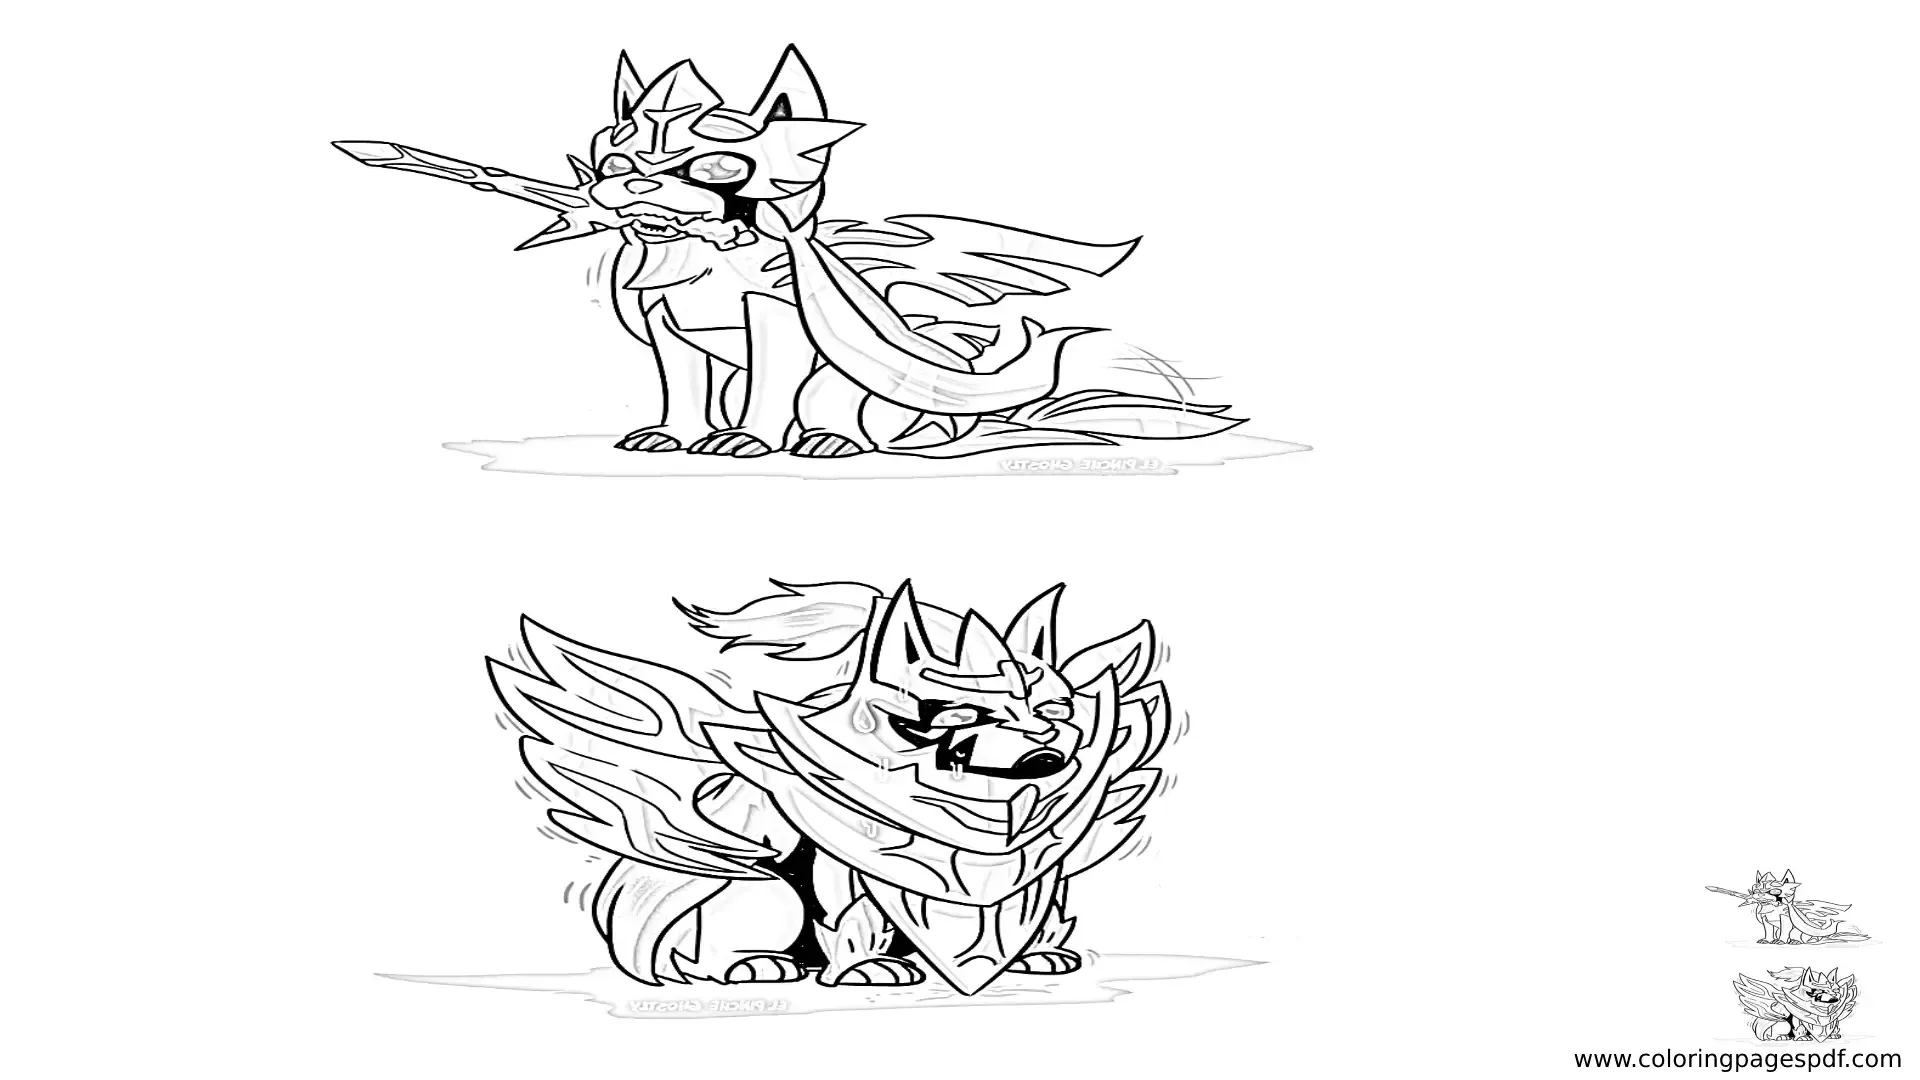 Coloring Page Of Zacian Both Forms As A Cute Dog